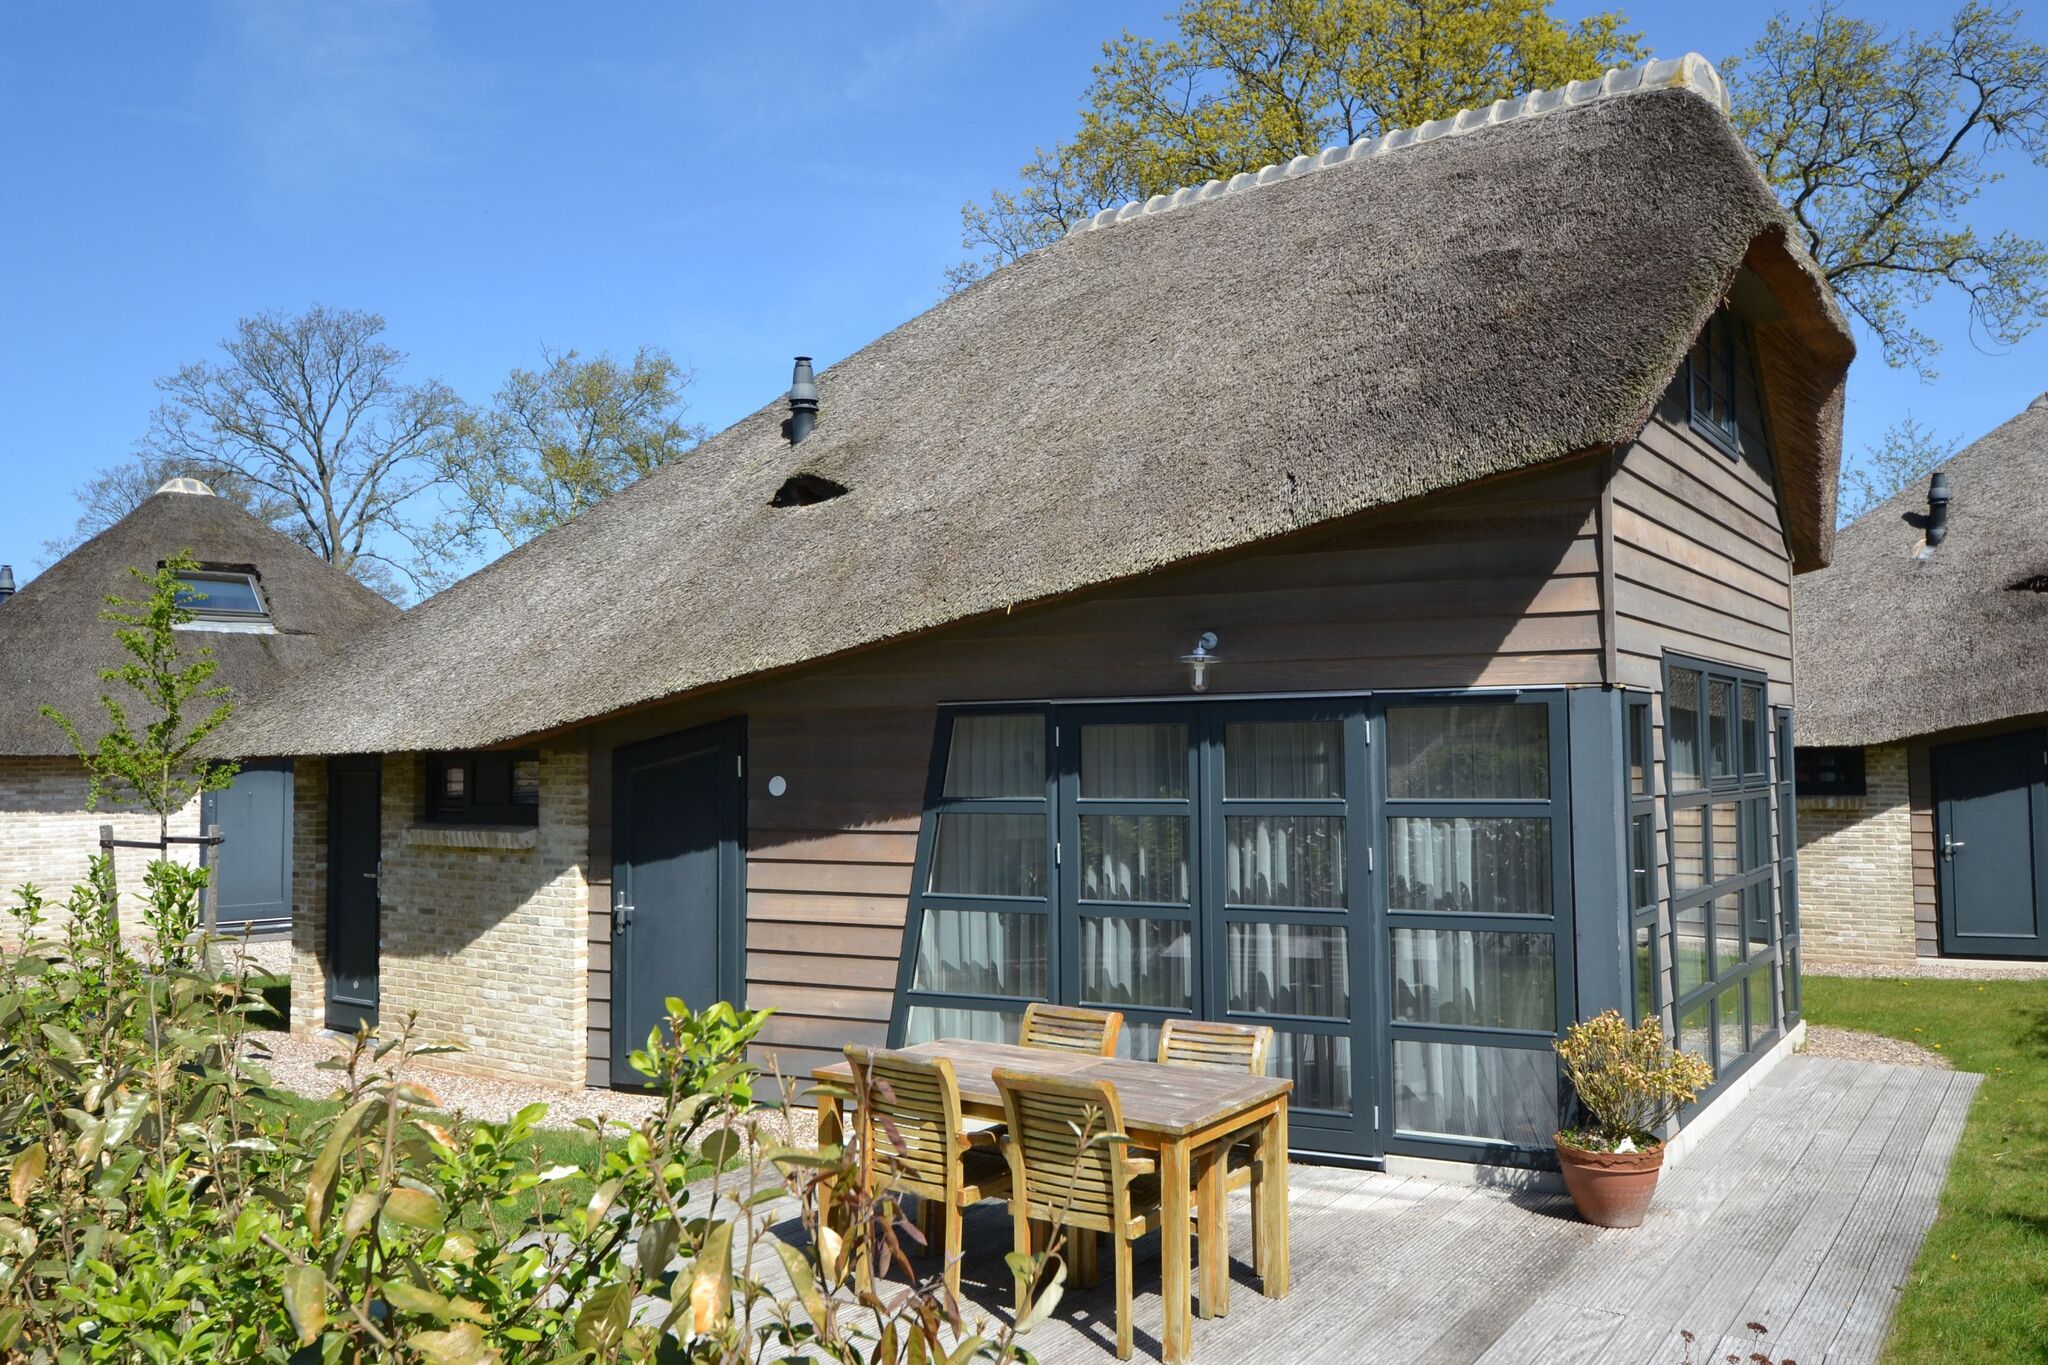 Luxurious, thatched cottage at the Schoorl dune area